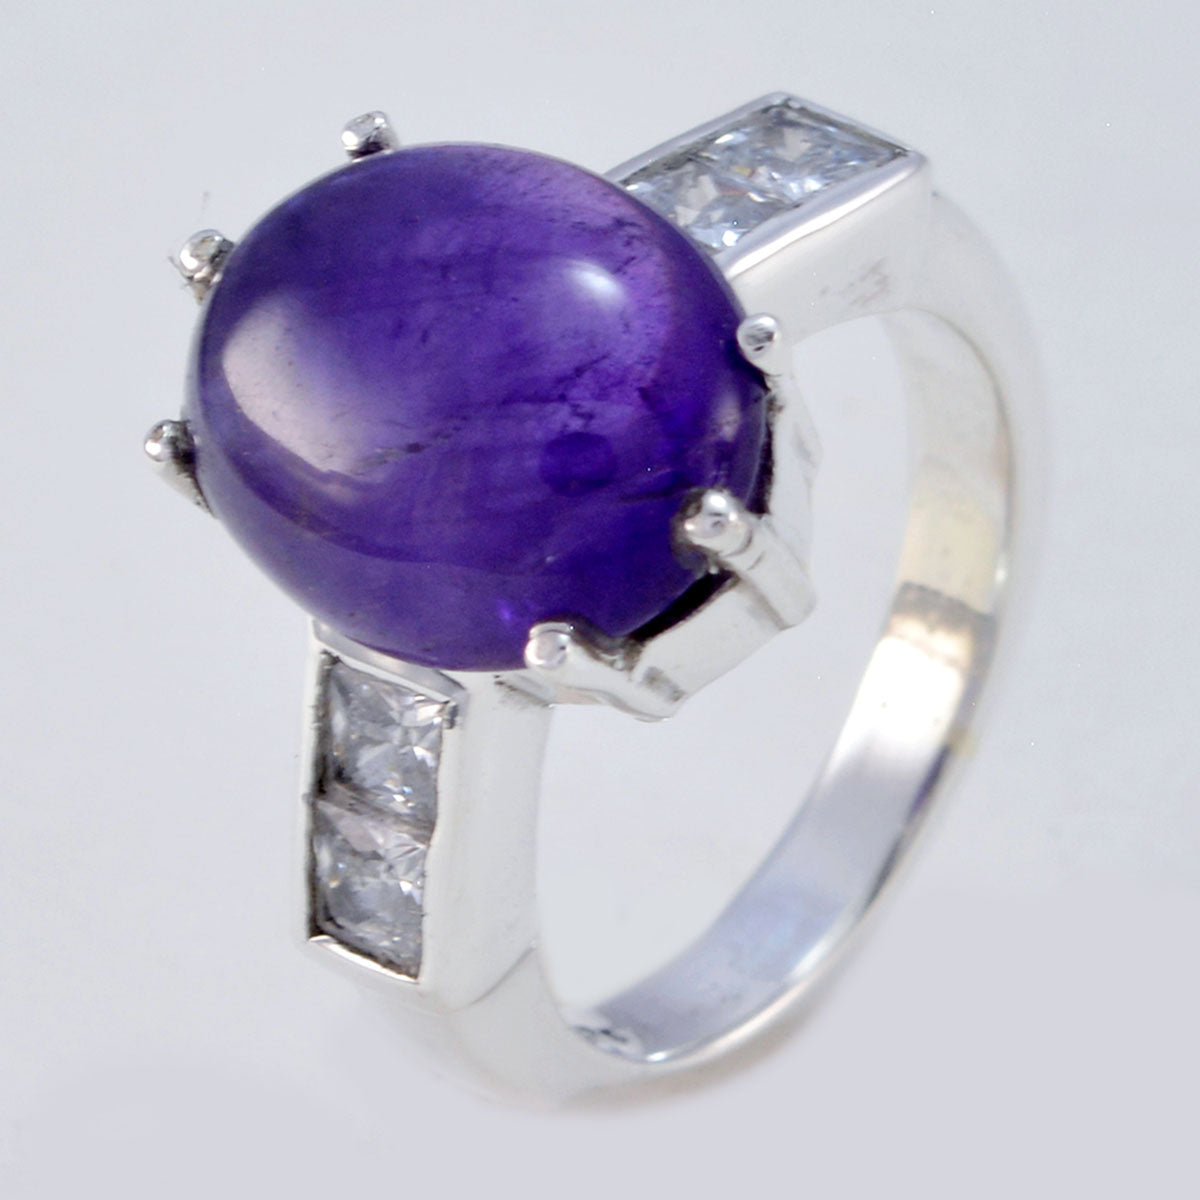 Engaging Gems Amethyst Solid Silver Ring Cremation Jewelry For Ashes